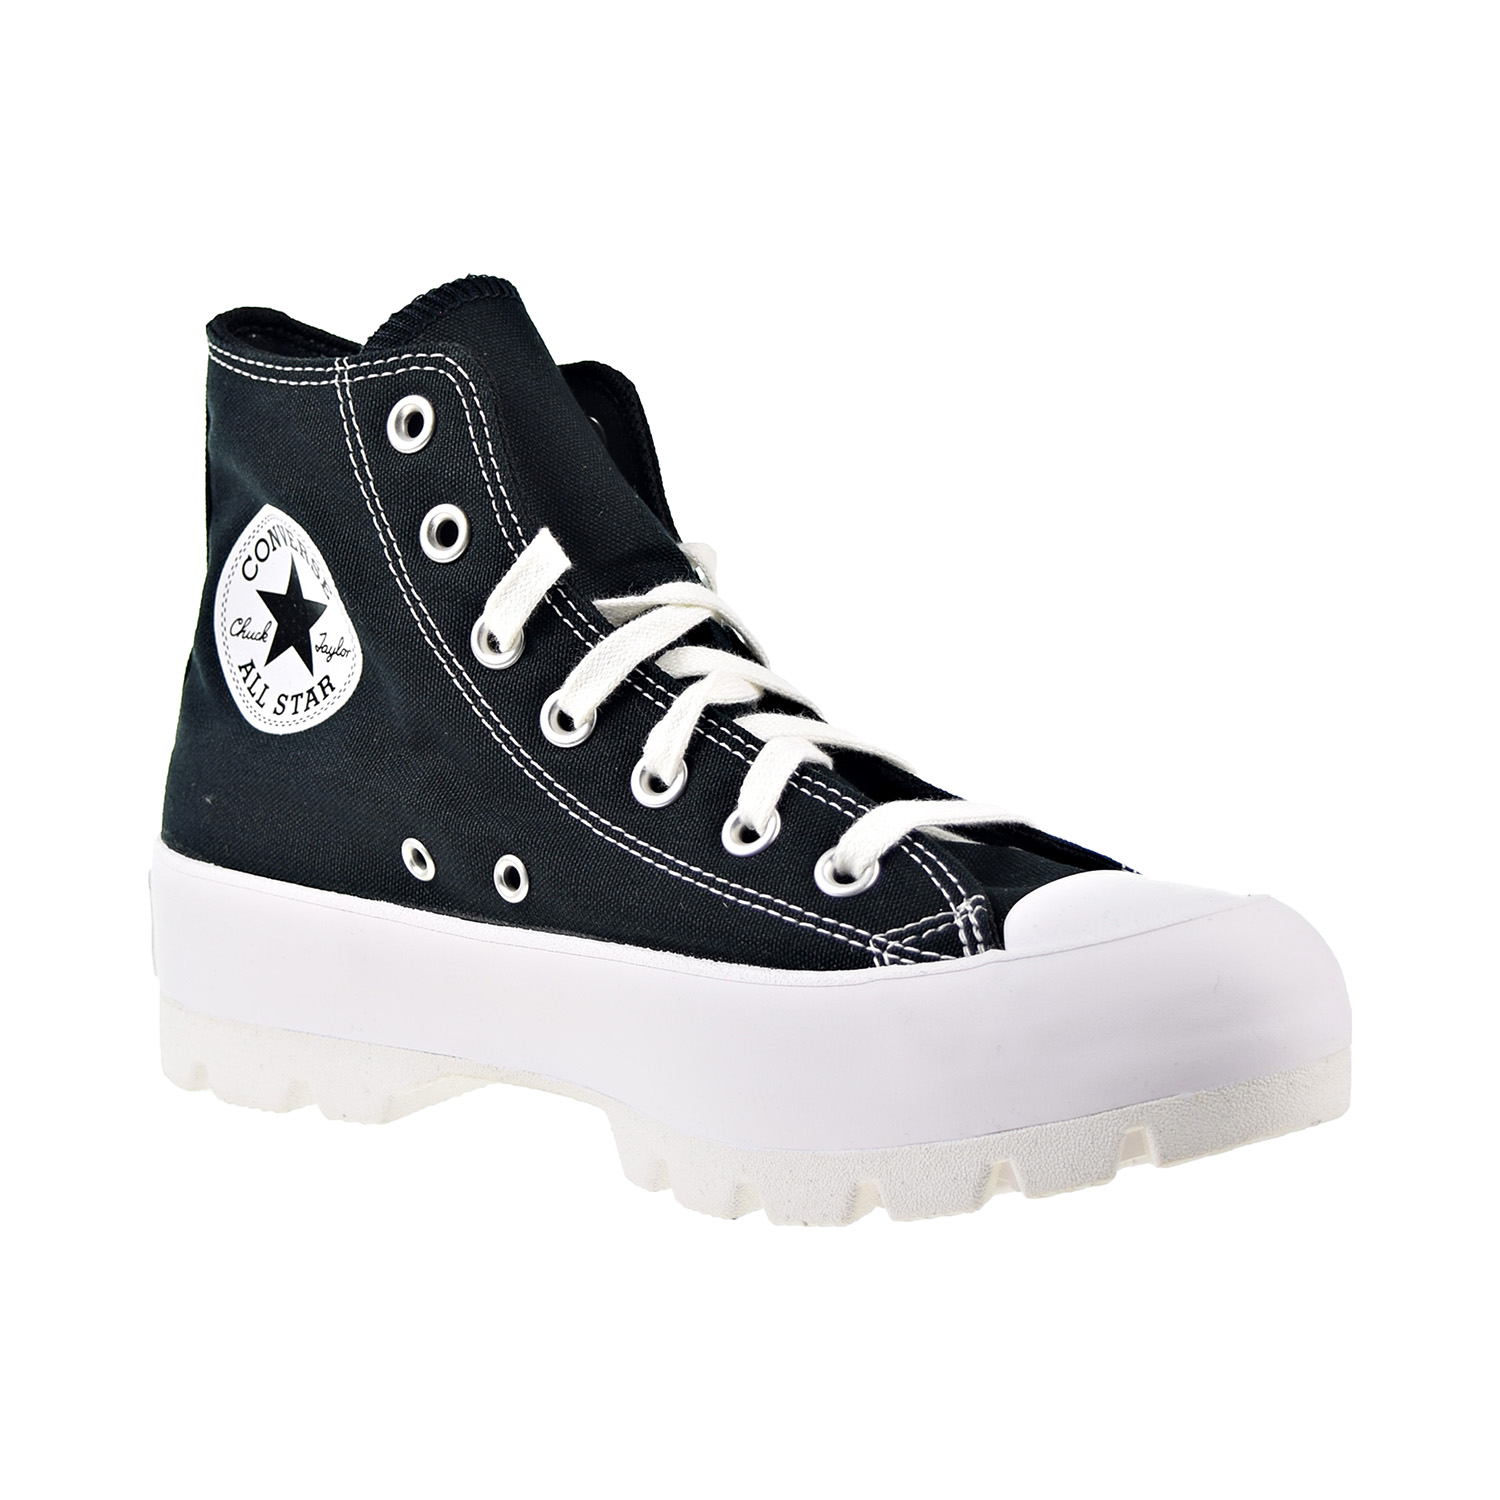 Converse Chuck Taylor All Star Lugged Hi Women's Shoes Black-White 565901c